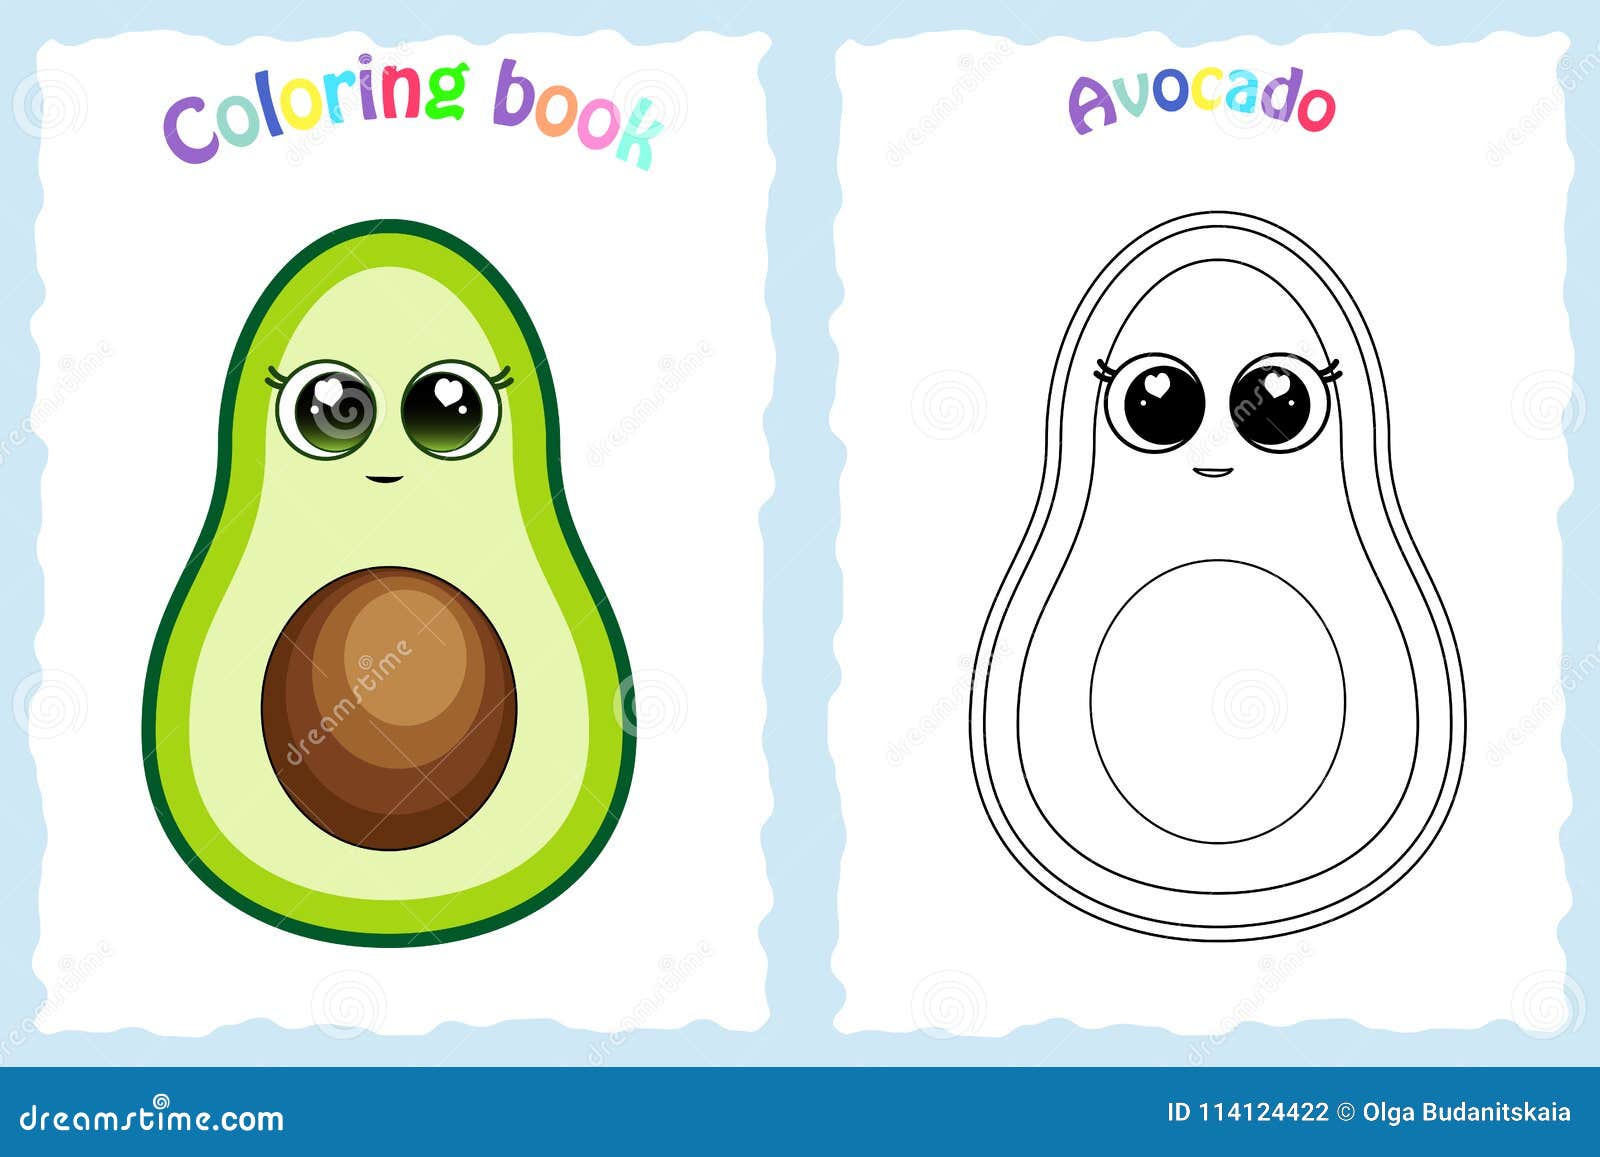 Coloring Book Page for Preschool Children with Colorful Avocado ...